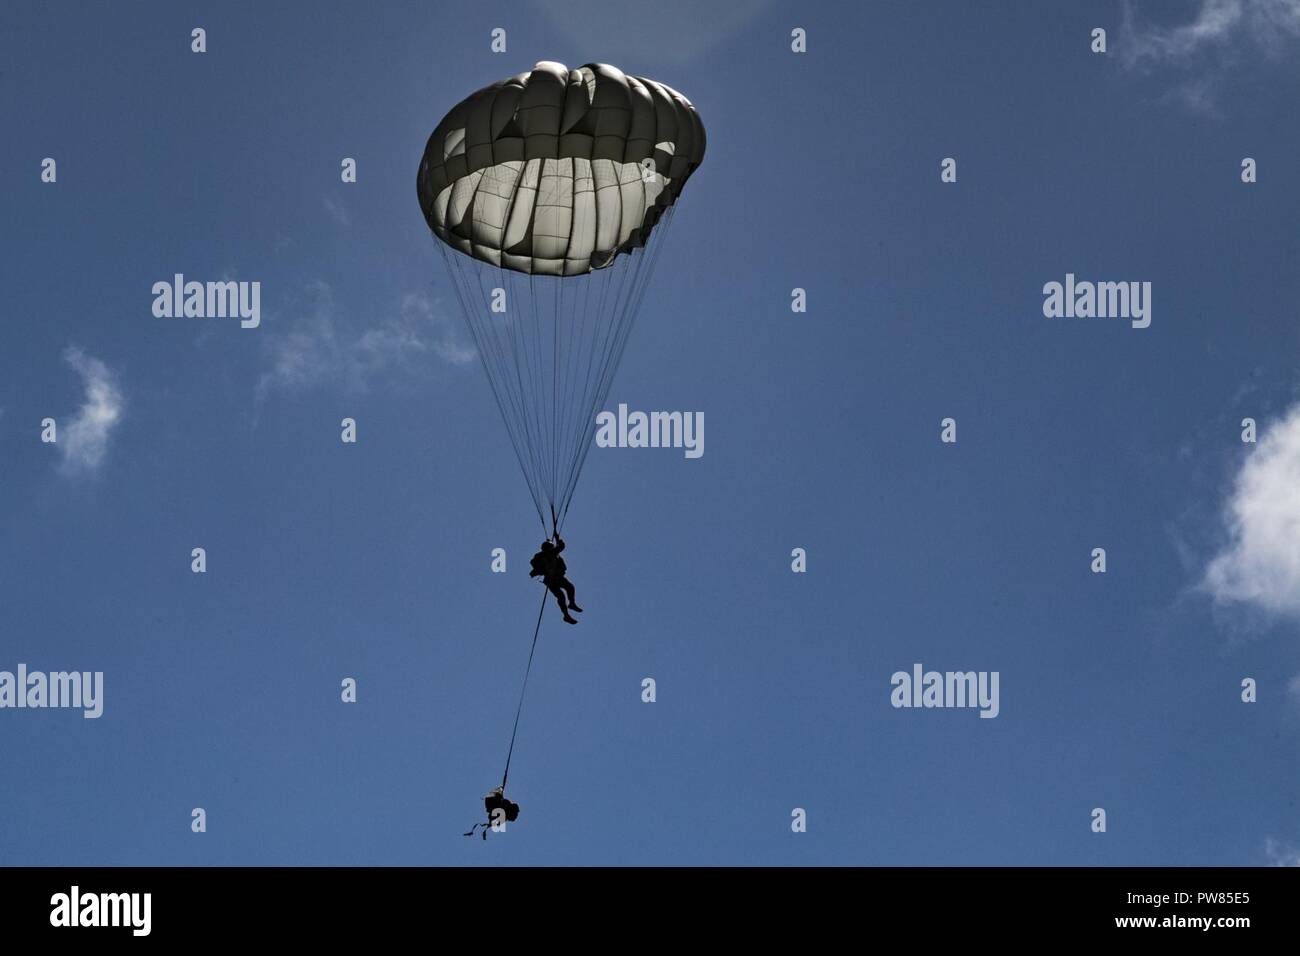 A member of the 820th Base Defense Group descends during a static-line jump, Oct. 3, 2017, at the Lee Fulp drop zone in Tifton, Ga. During a static-line jump, the jumper is attached to the aircraft via the ‘static-line’, which automatically deploys the jumpers’ parachute after they’ve exited the aircraft. Stock Photo